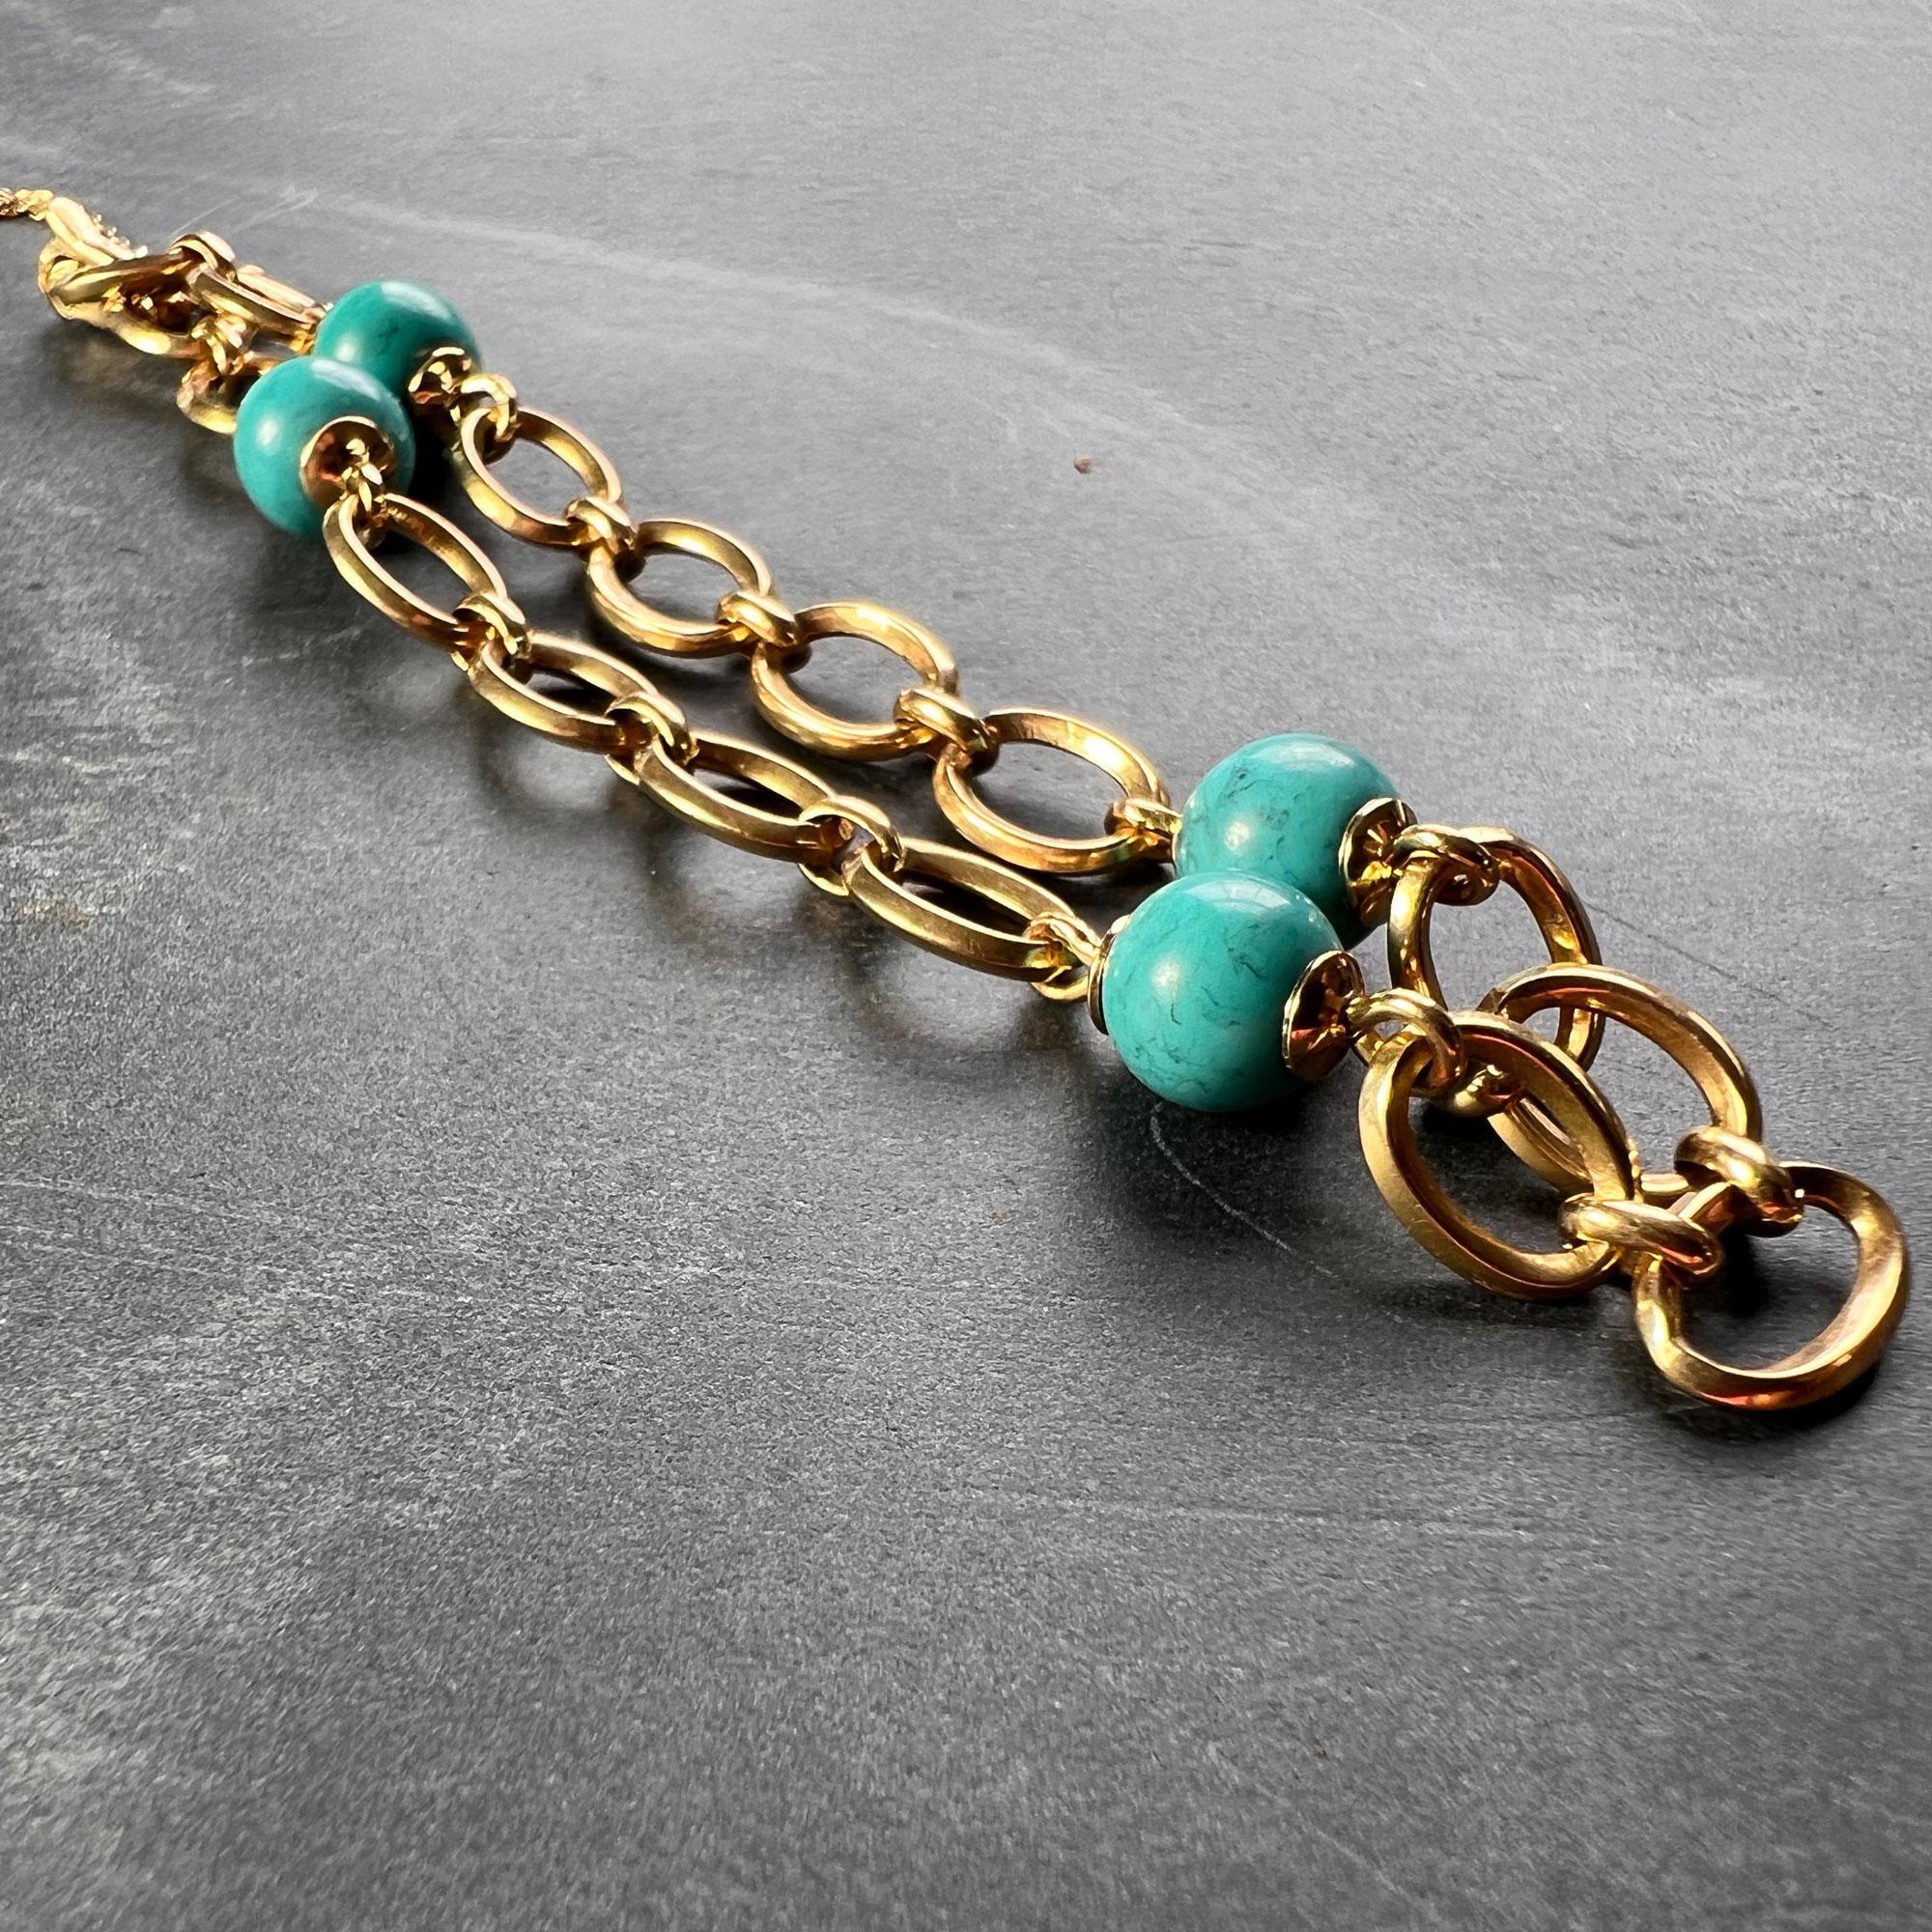 An 18 karat (18K) yellow gold bracelet designed as elongated links set with four evenly spaced round natural turquoise beads. Stamped with the owl mark for 18 karat gold and French import. 7.5” long. With safety chain for added